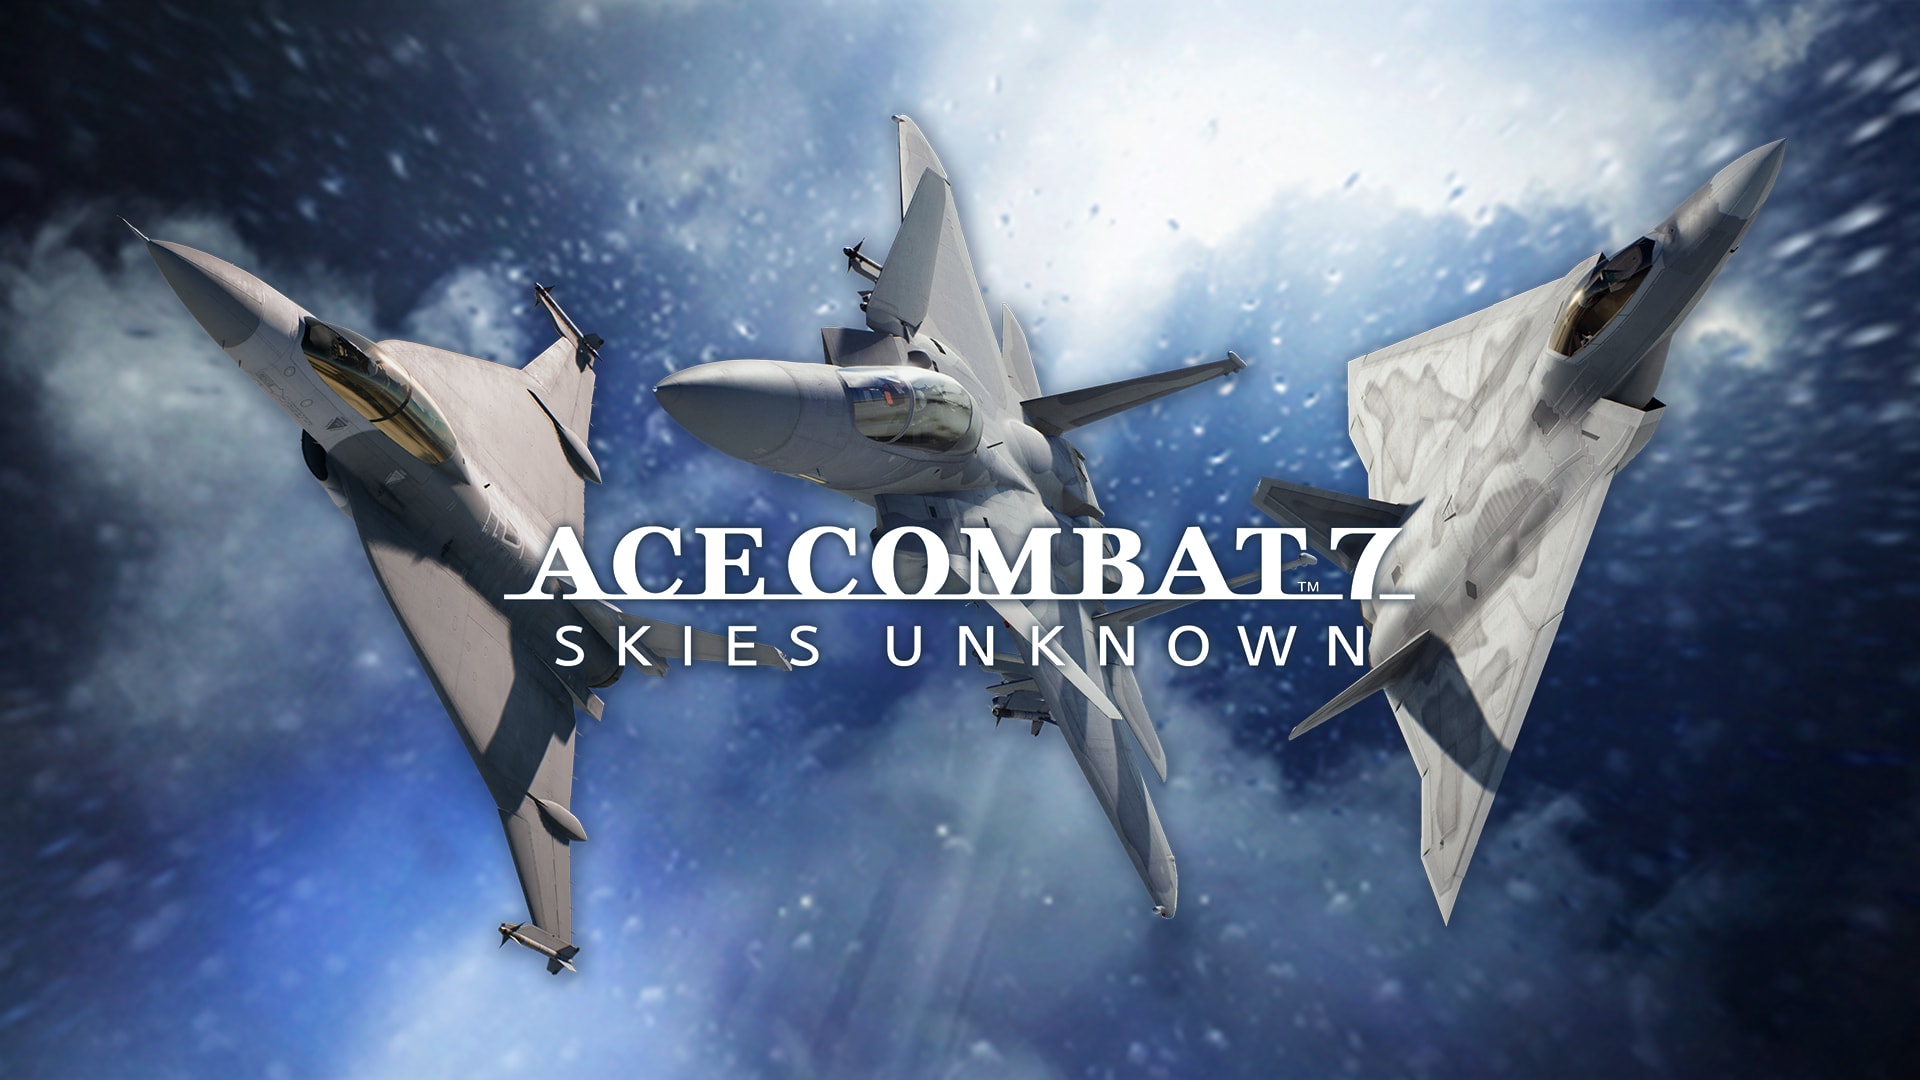 ACE COMBAT™7: SKIES UNKNOWN - Experimental Aircraft Series Set